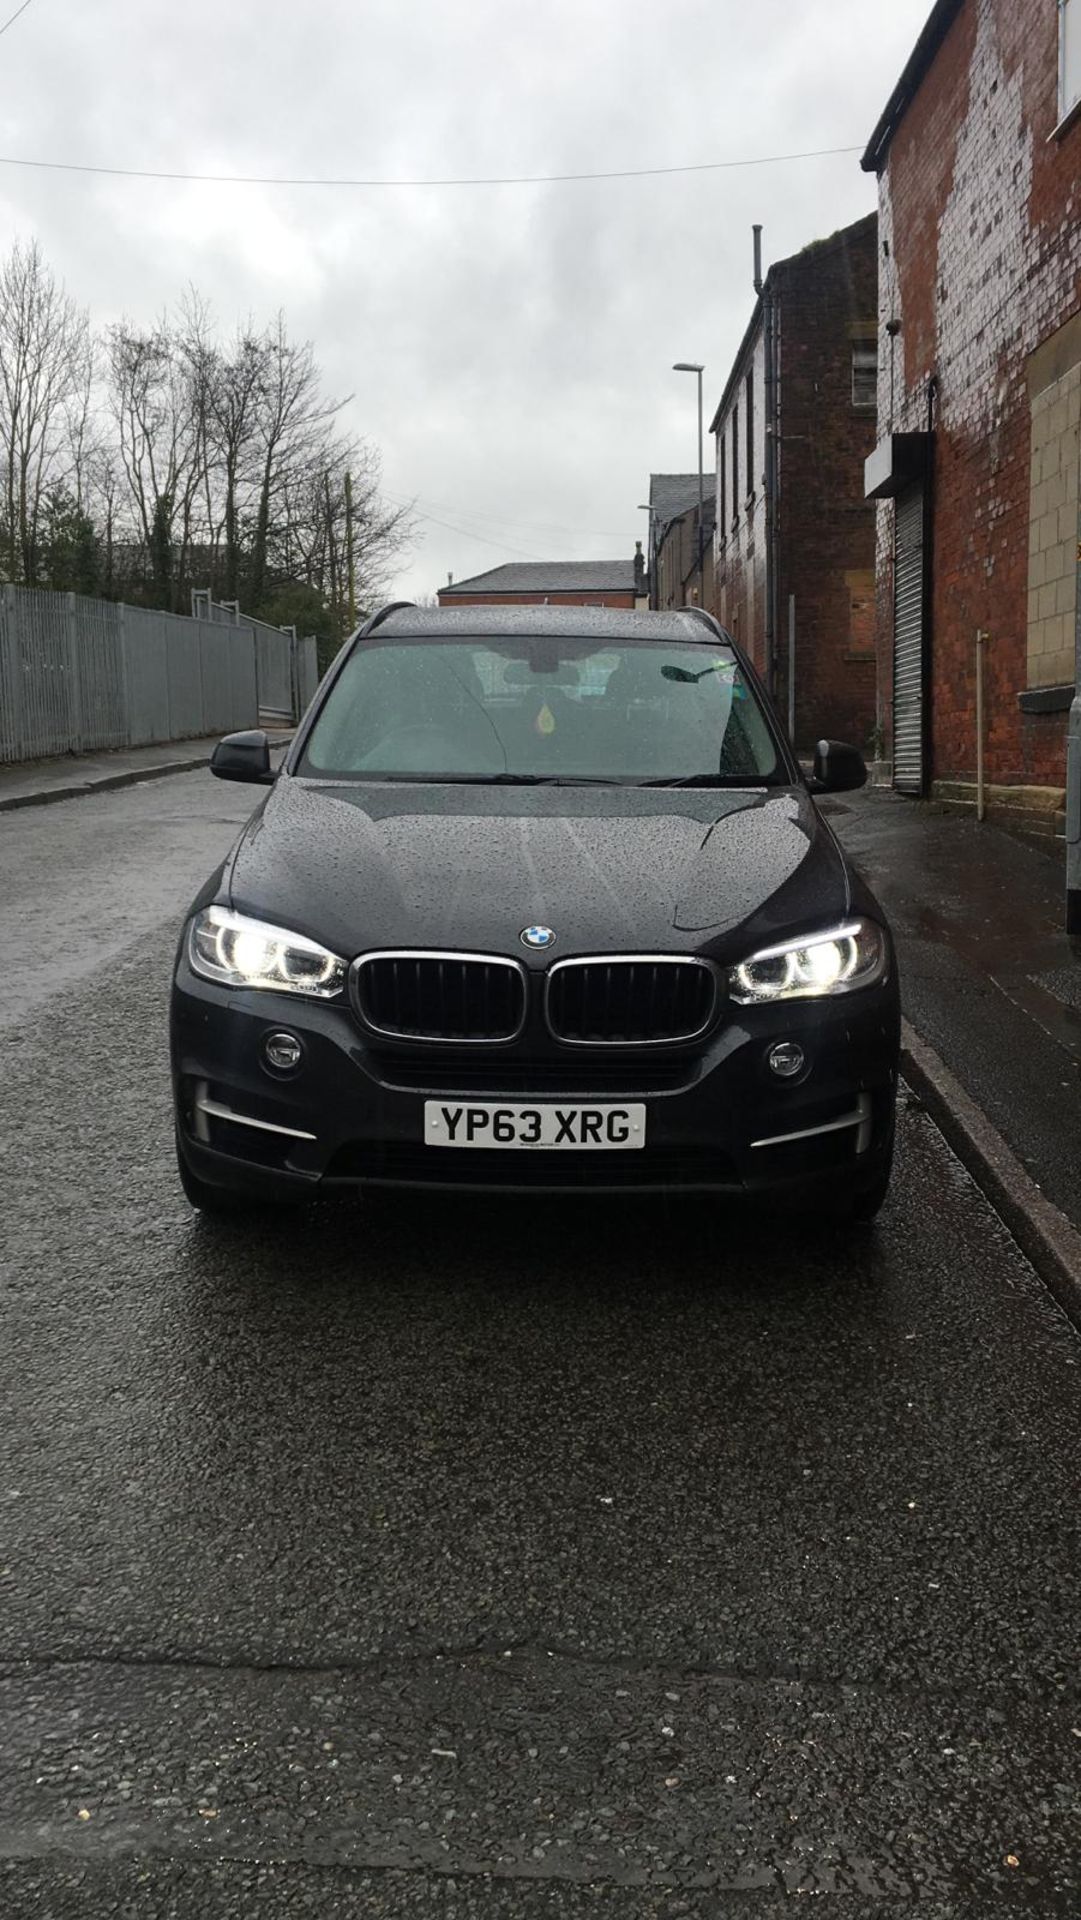 2013/63 REG BMW X5 XDRIVE 30D SE AUTOMATIC 3.0 DIESEL GREY 4X4, SHOWING 1 FORMER KEEPER *NO VAT* - Image 2 of 7